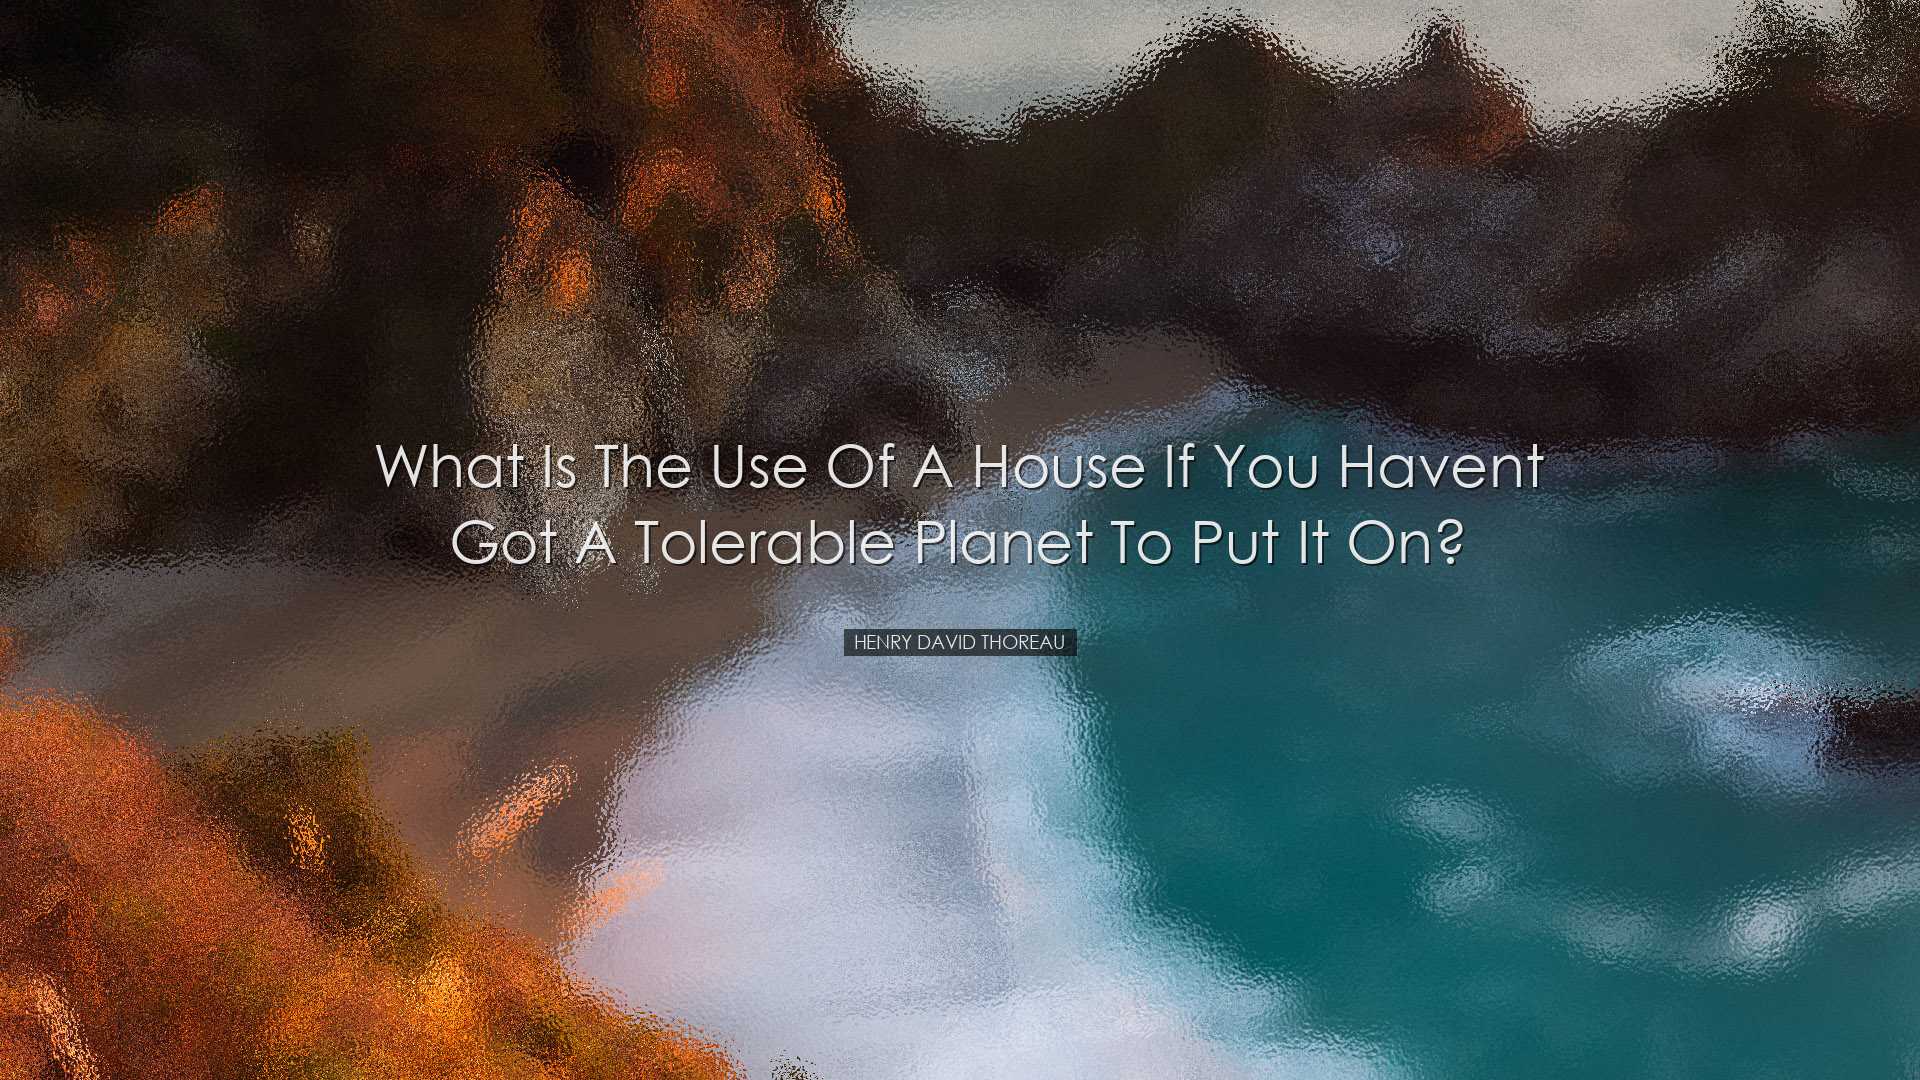 What is the use of a house if you havent got a tolerable planet to